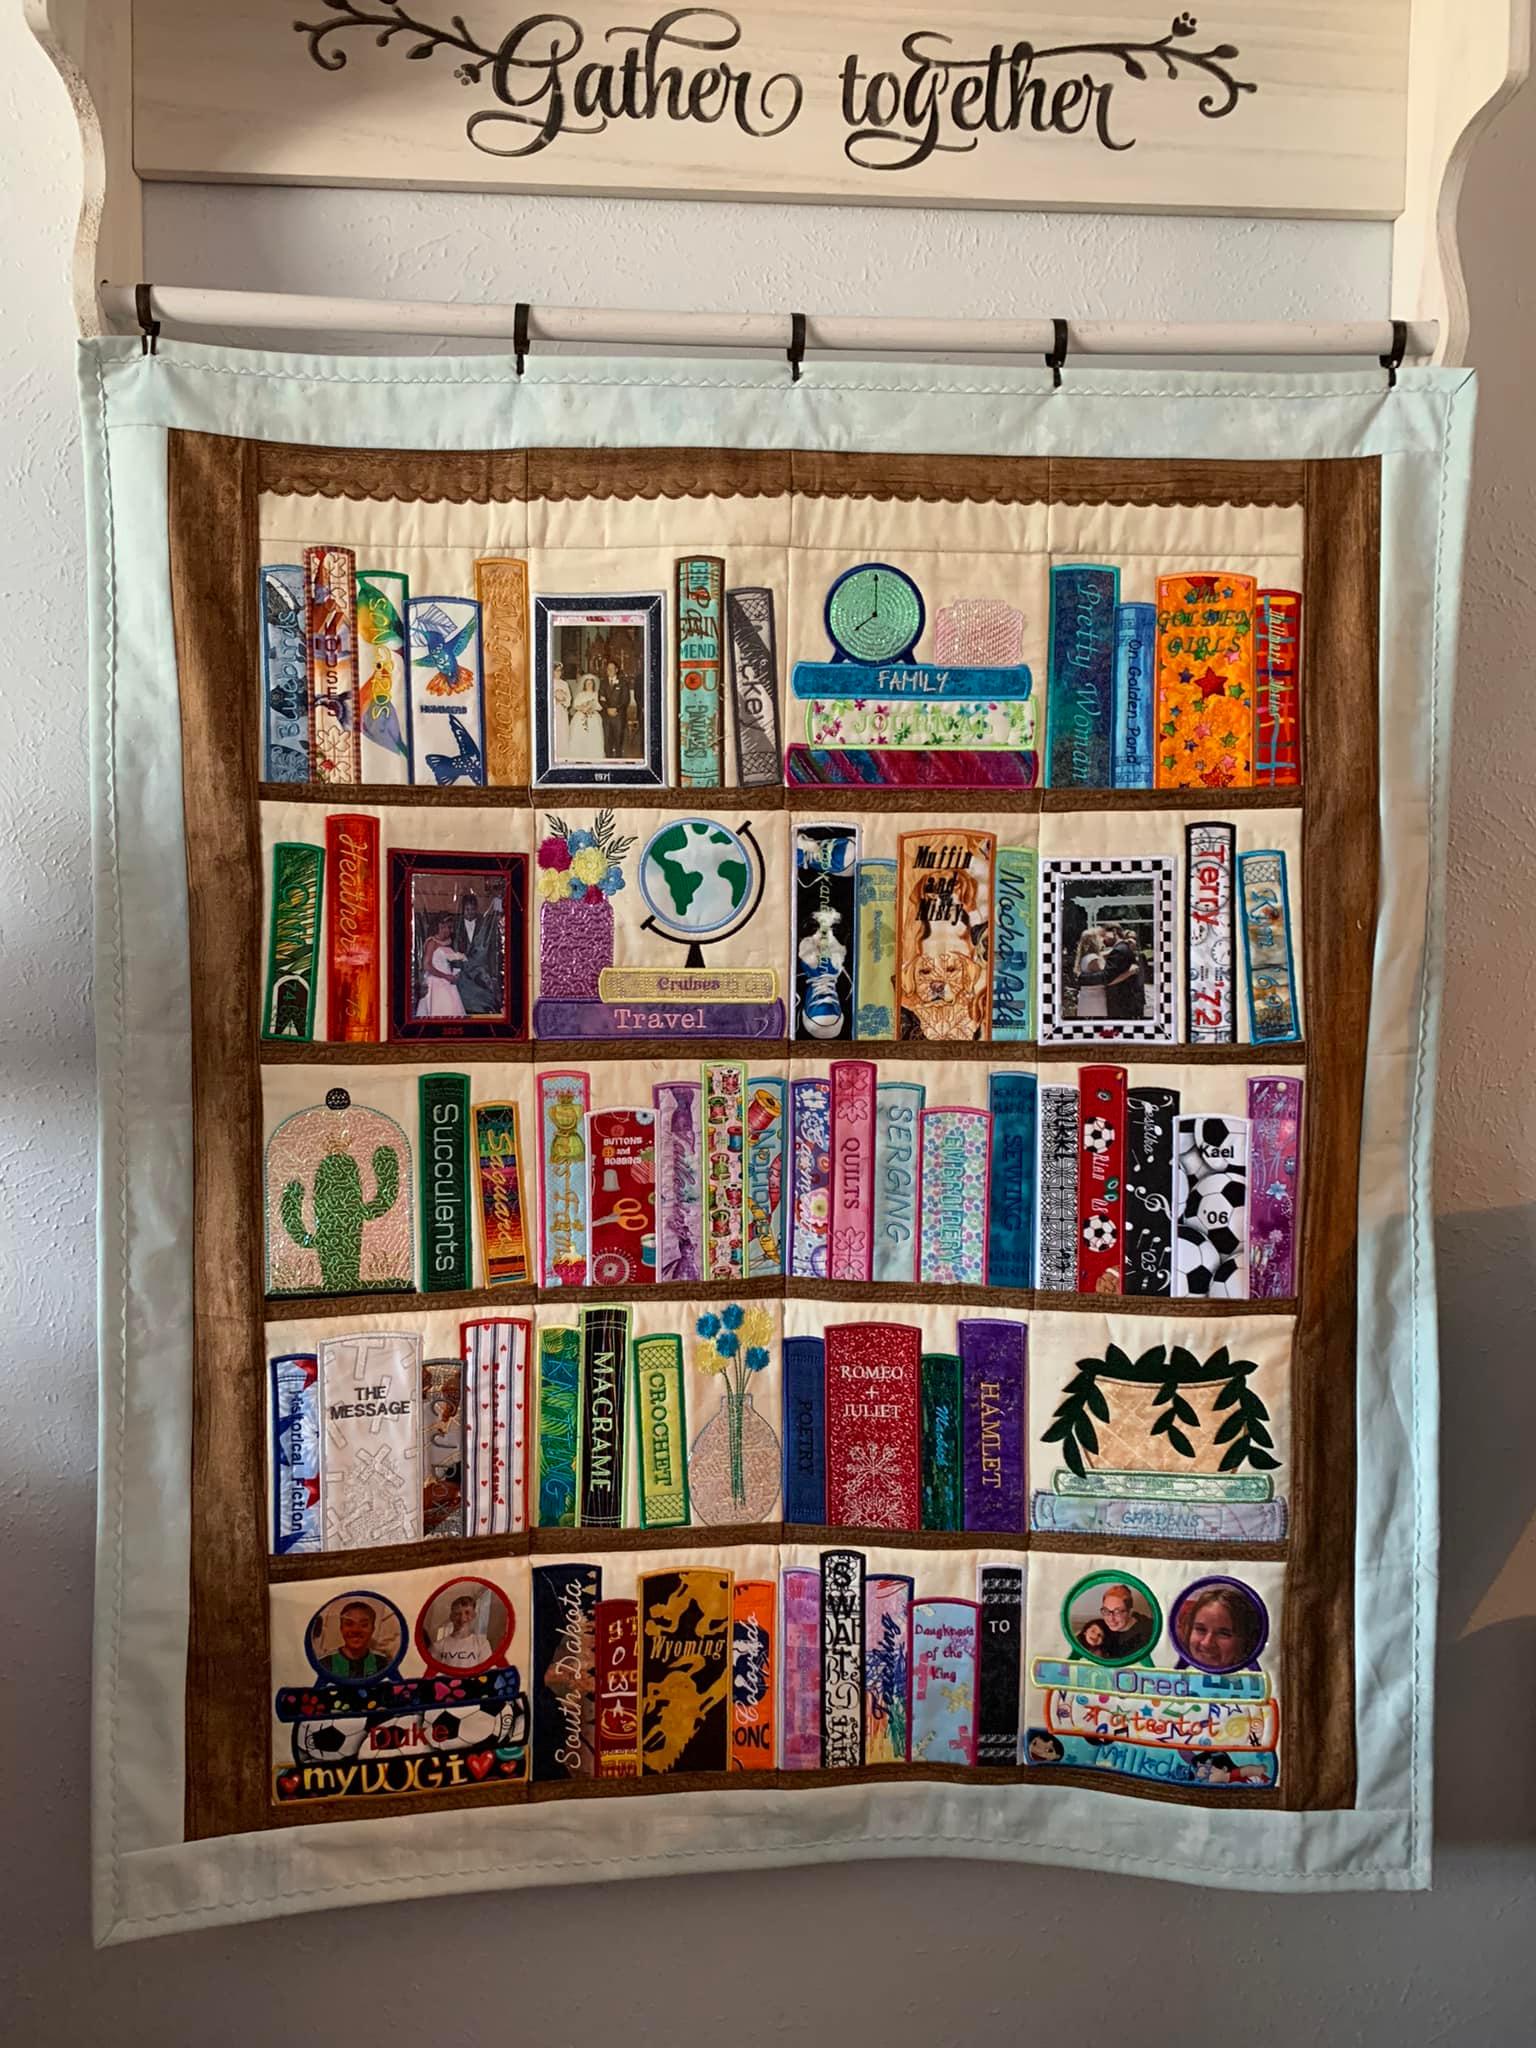 Bookshelf Quilt 4x4 5x5 6x6 7x7 - Sweet Pea Australia In the hoop machine embroidery designs. in the hoop project, in the hoop embroidery designs, craft in the hoop project, diy in the hoop project, diy craft in the hoop project, in the hoop embroidery patterns, design in the hoop patterns, embroidery designs for in the hoop embroidery projects, best in the hoop machine embroidery designs perfect for all hoops and embroidery machines